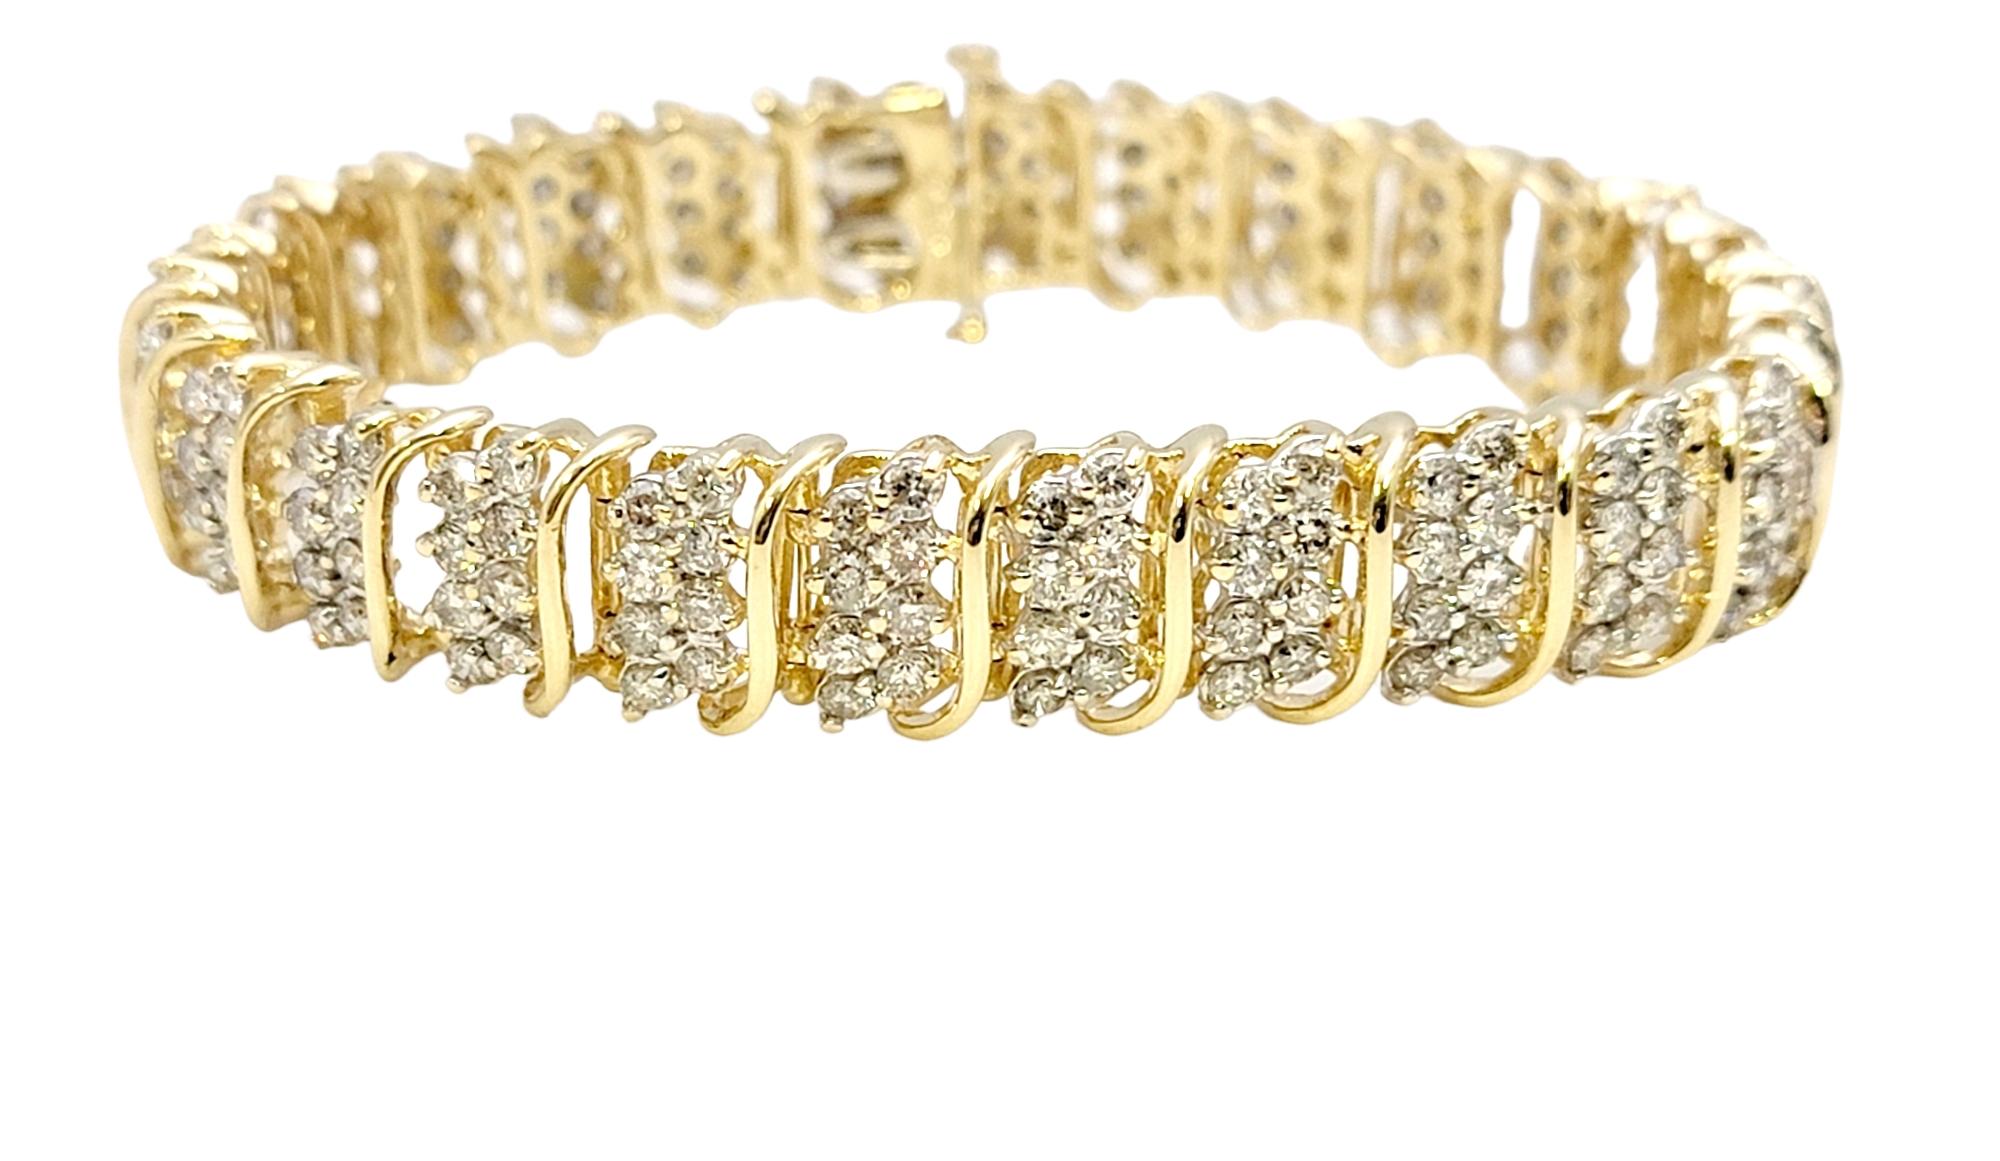 Absolutely dazzling modern tennis bracelet filled from end to end with 8.81 carats of bright sparkling natural diamonds. The flexible 'S' links hug the wrist for a comfortable and secure fit, while the gentle movement allows for massive sparkle from